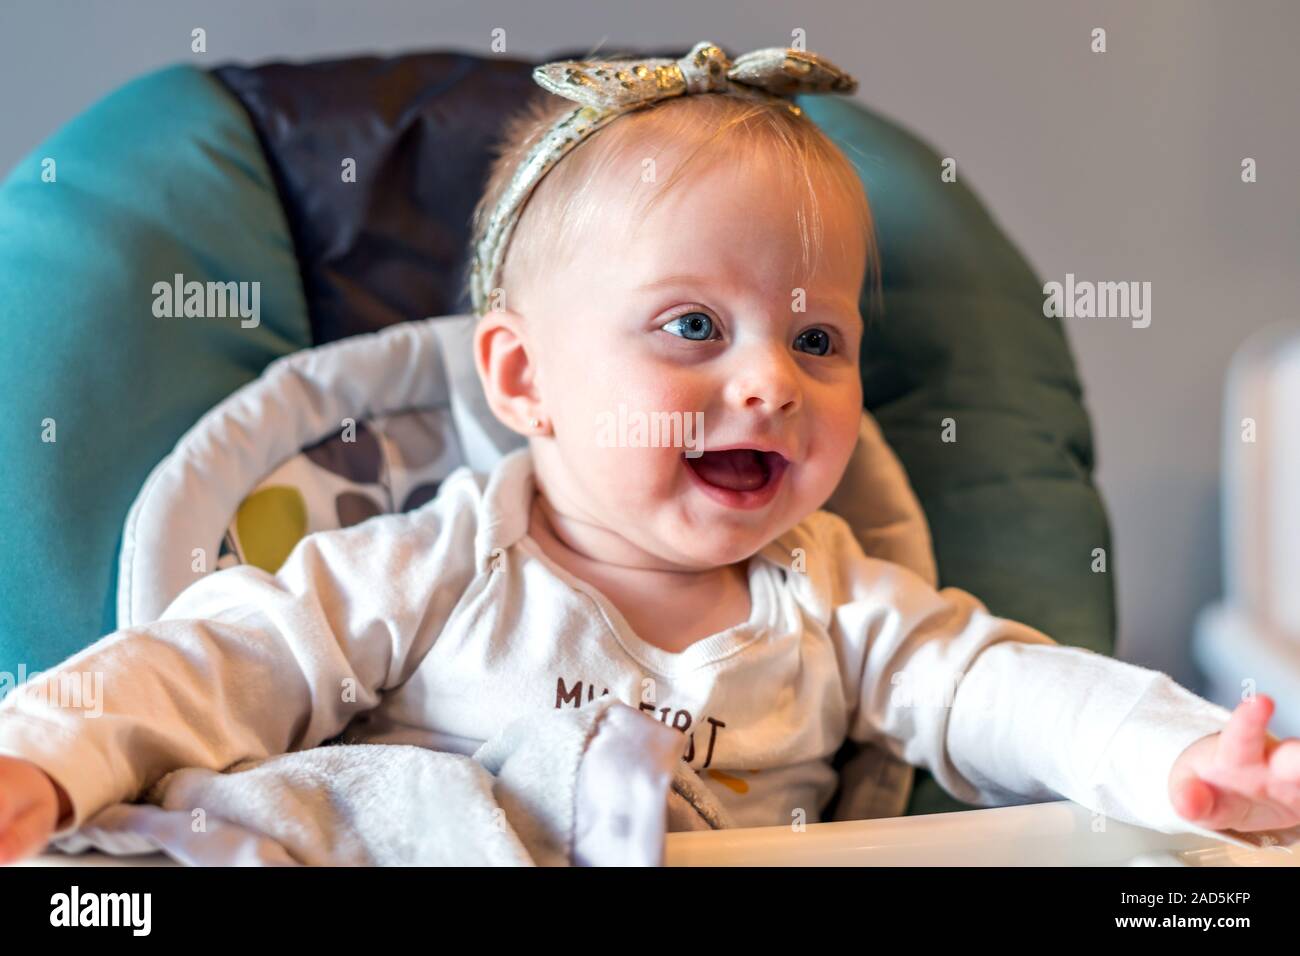 Baby Girl Happy And Smiling On High Chair Age 6 Months Stock